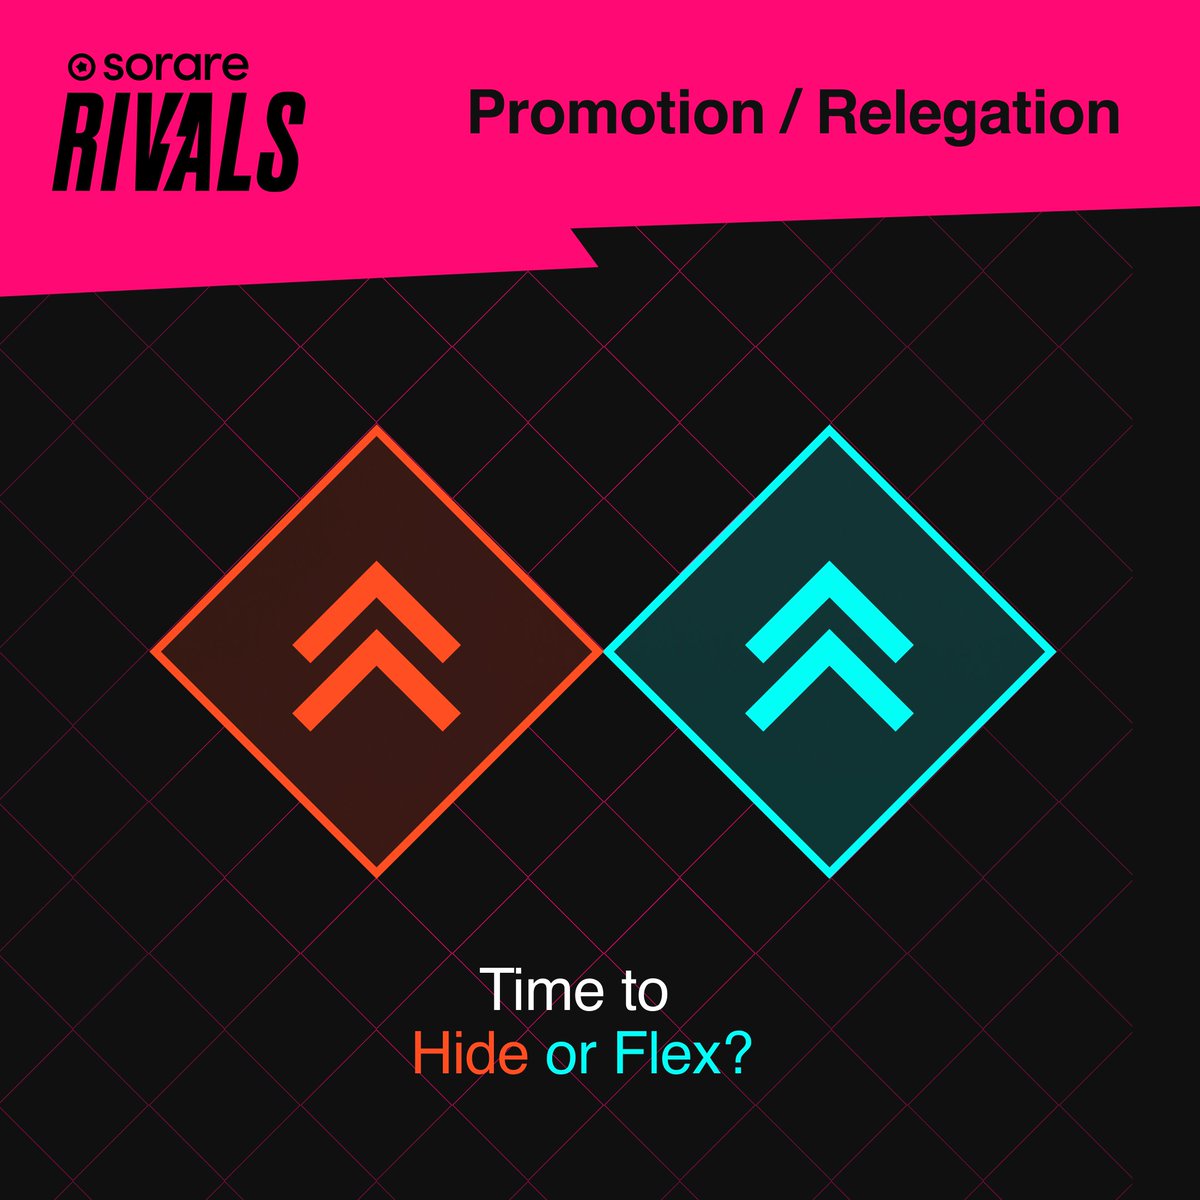 Our first relegation and promotion results are in since launching #SorareRivals 2.0. ⚡️ 🎩 Had a good week? Flex and share your results! 💪 😳 Had a bad week? Share a gif that sums up your performance ⬇️